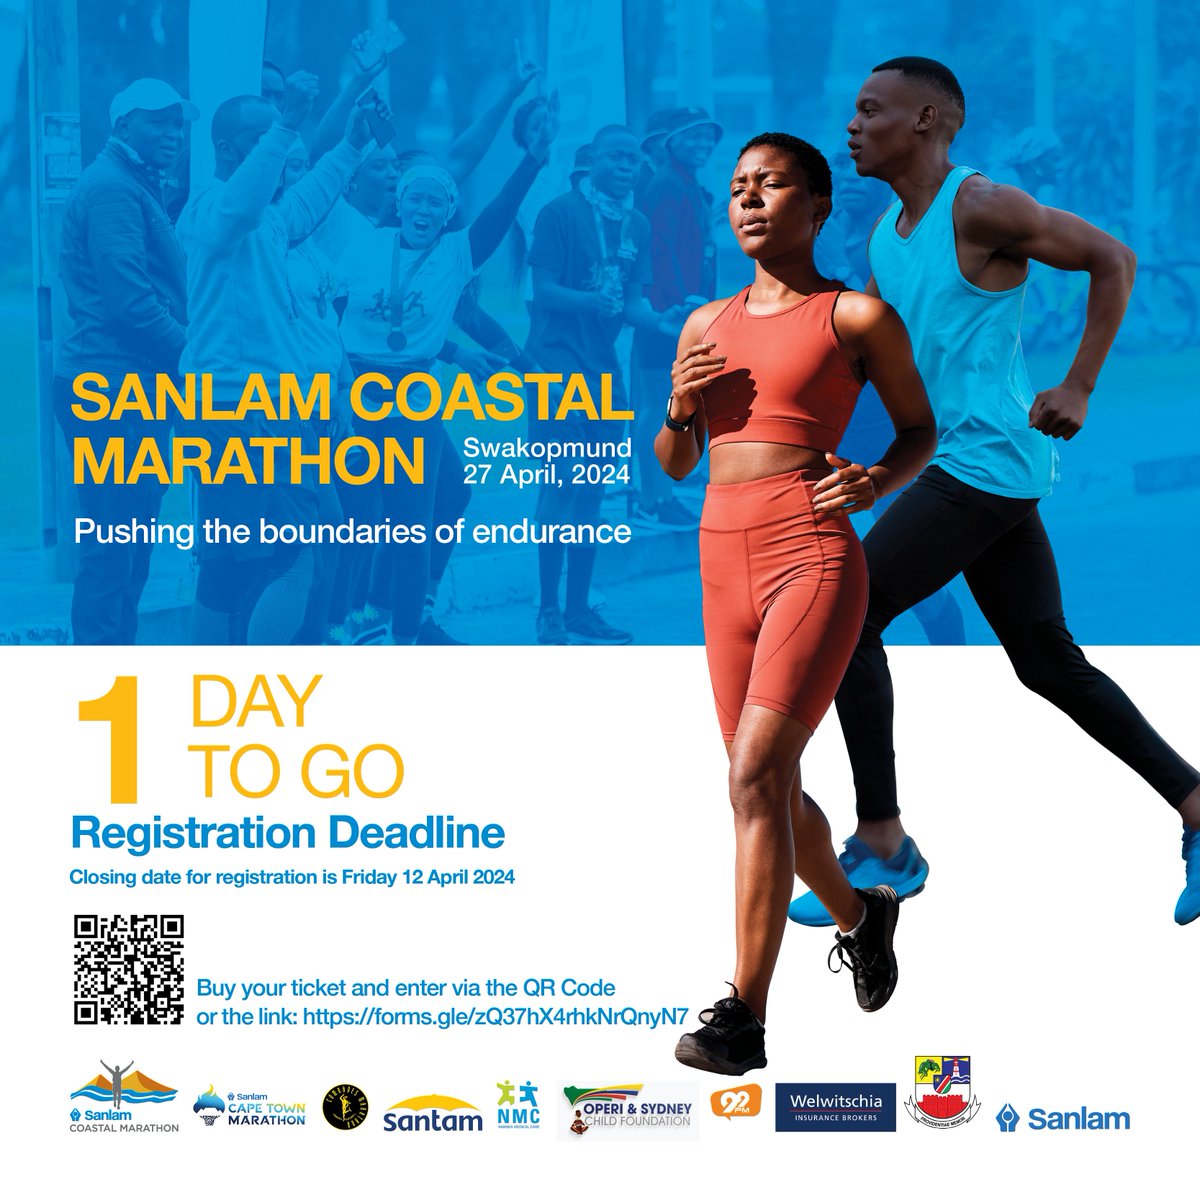 Enjoy Yourself! 🎉1 Day Countdown Tip: Stay Relaxed As the excitement builds for the #SanlamCoastalMarathon, remember to stay relaxed and enjoy the journey. Take some time to unwind & mentally prepare for tomorrow's race. See you at the starting line! 😊